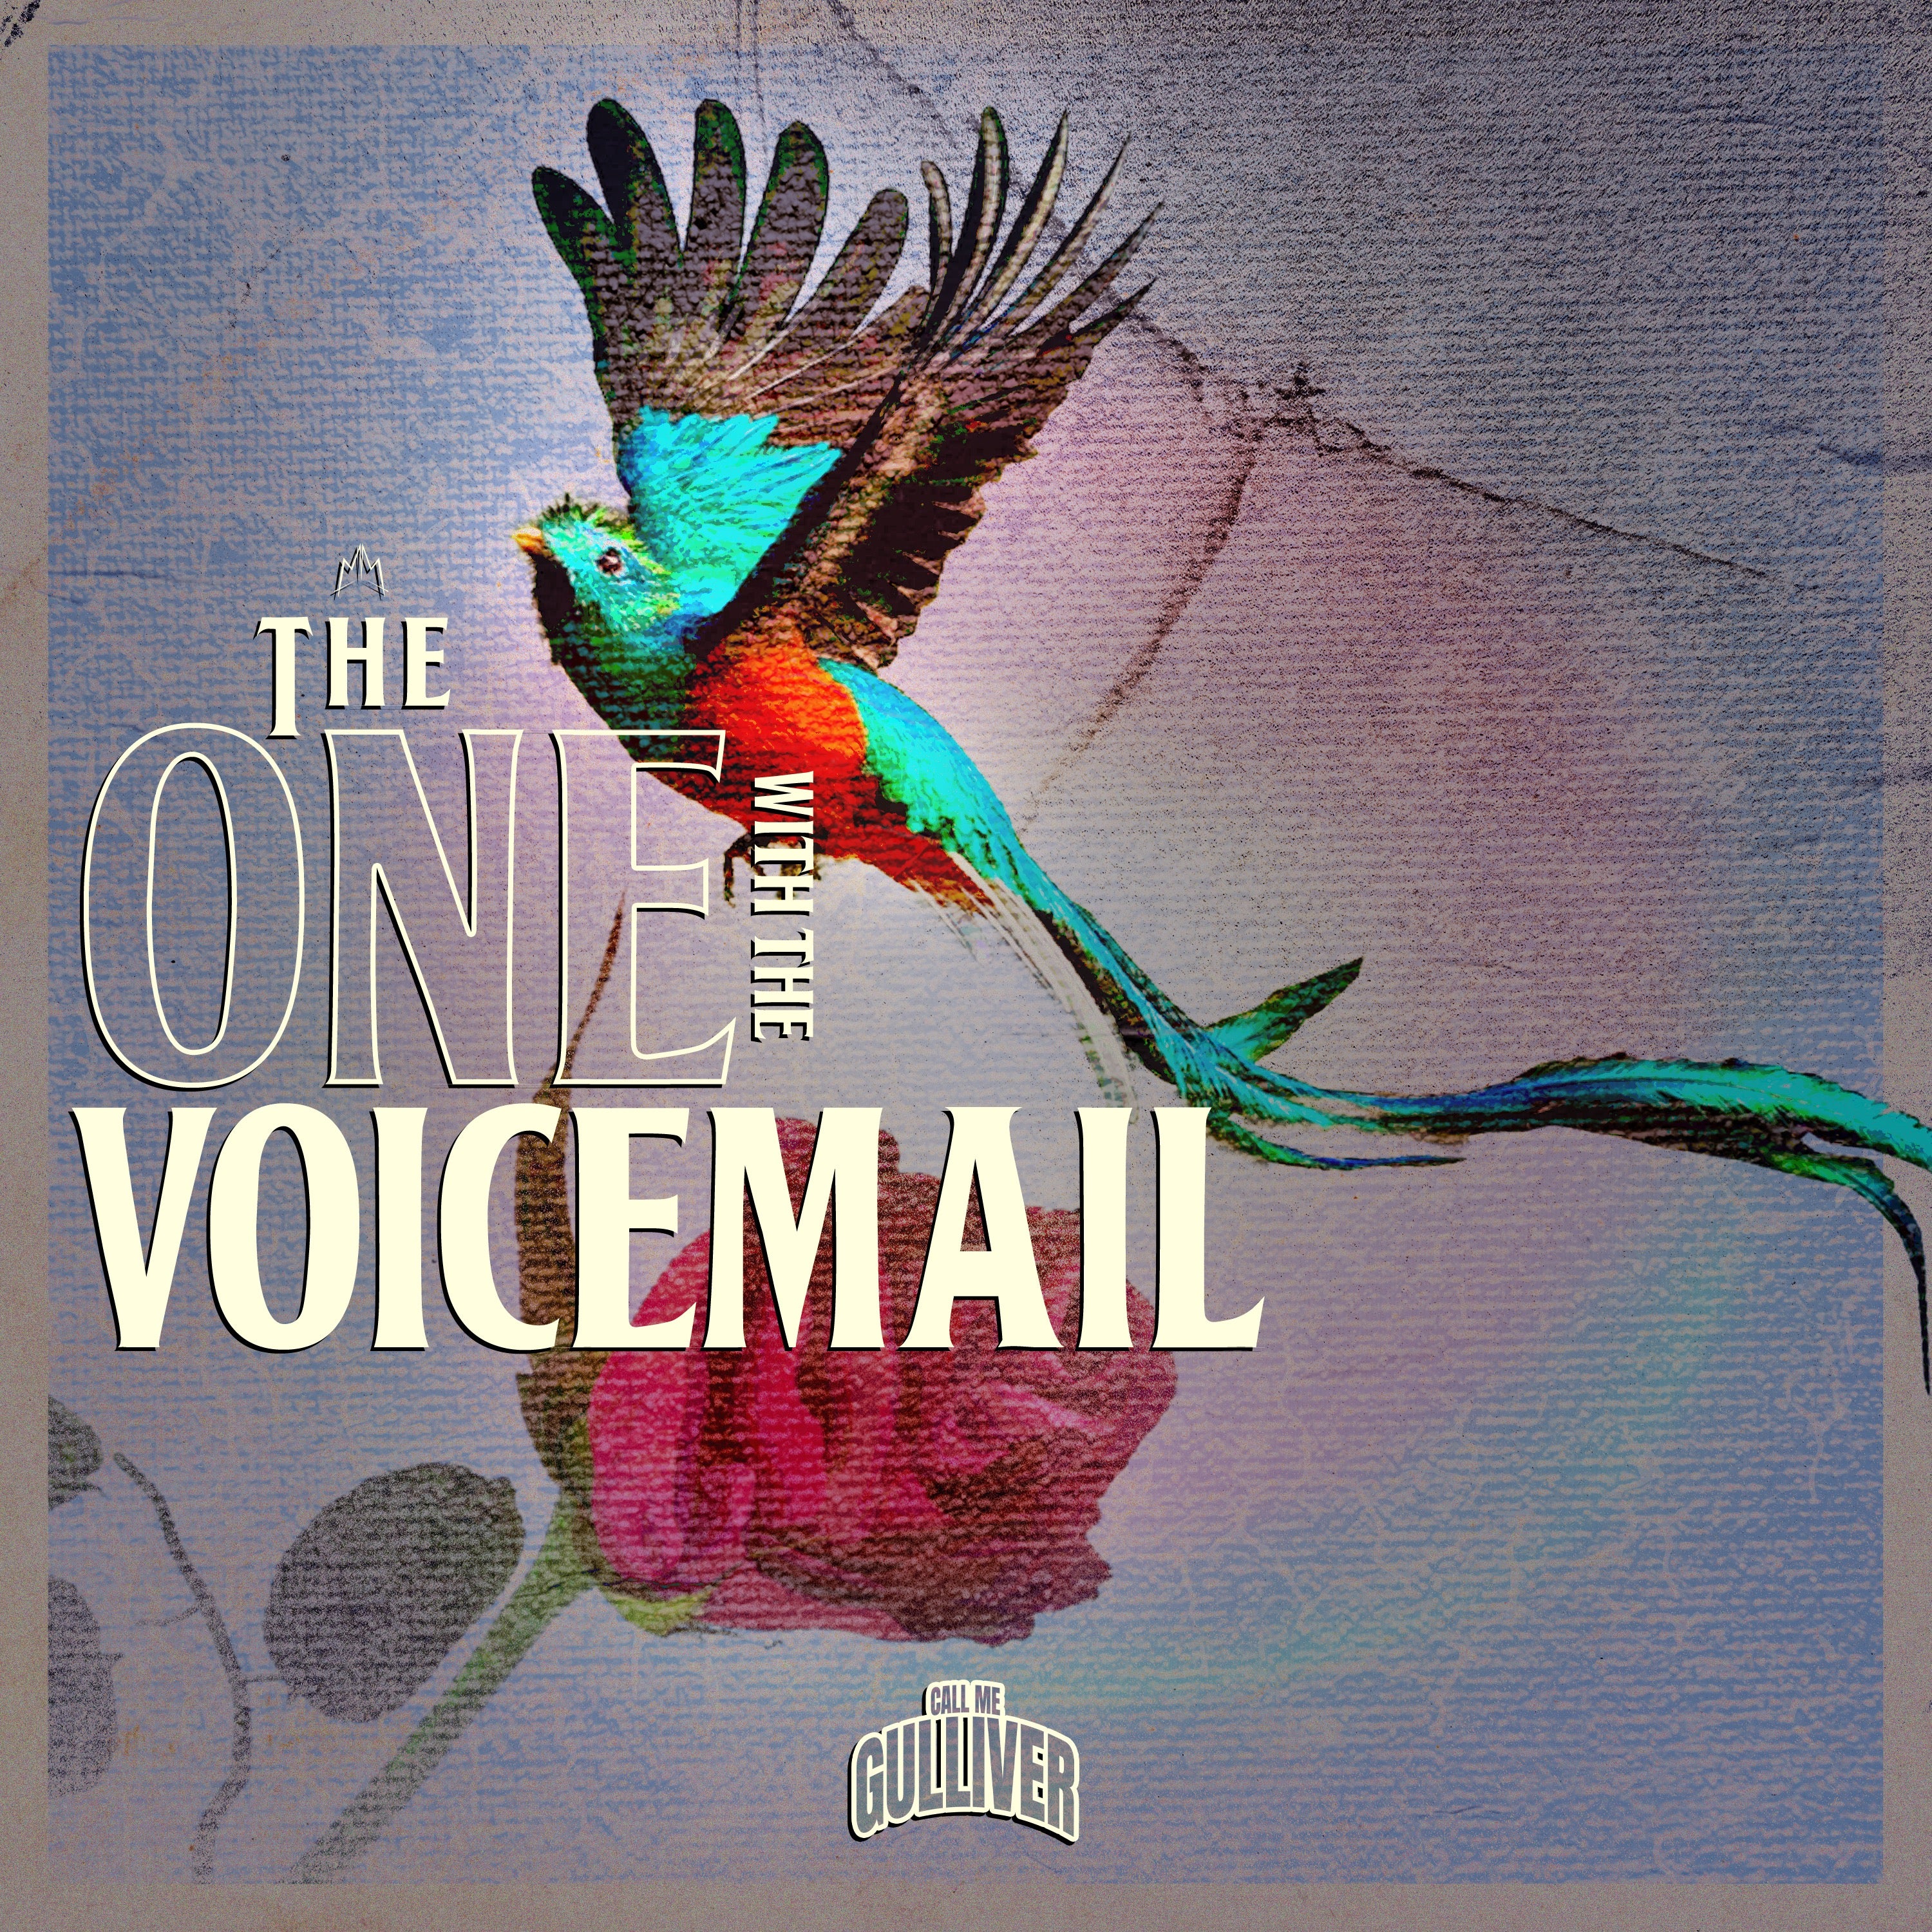 WORD IS BOND: CALLMEGULLIVER SHARES HIS THOUGHTS ON “THE ONE WITH THE VOICEMAIL”